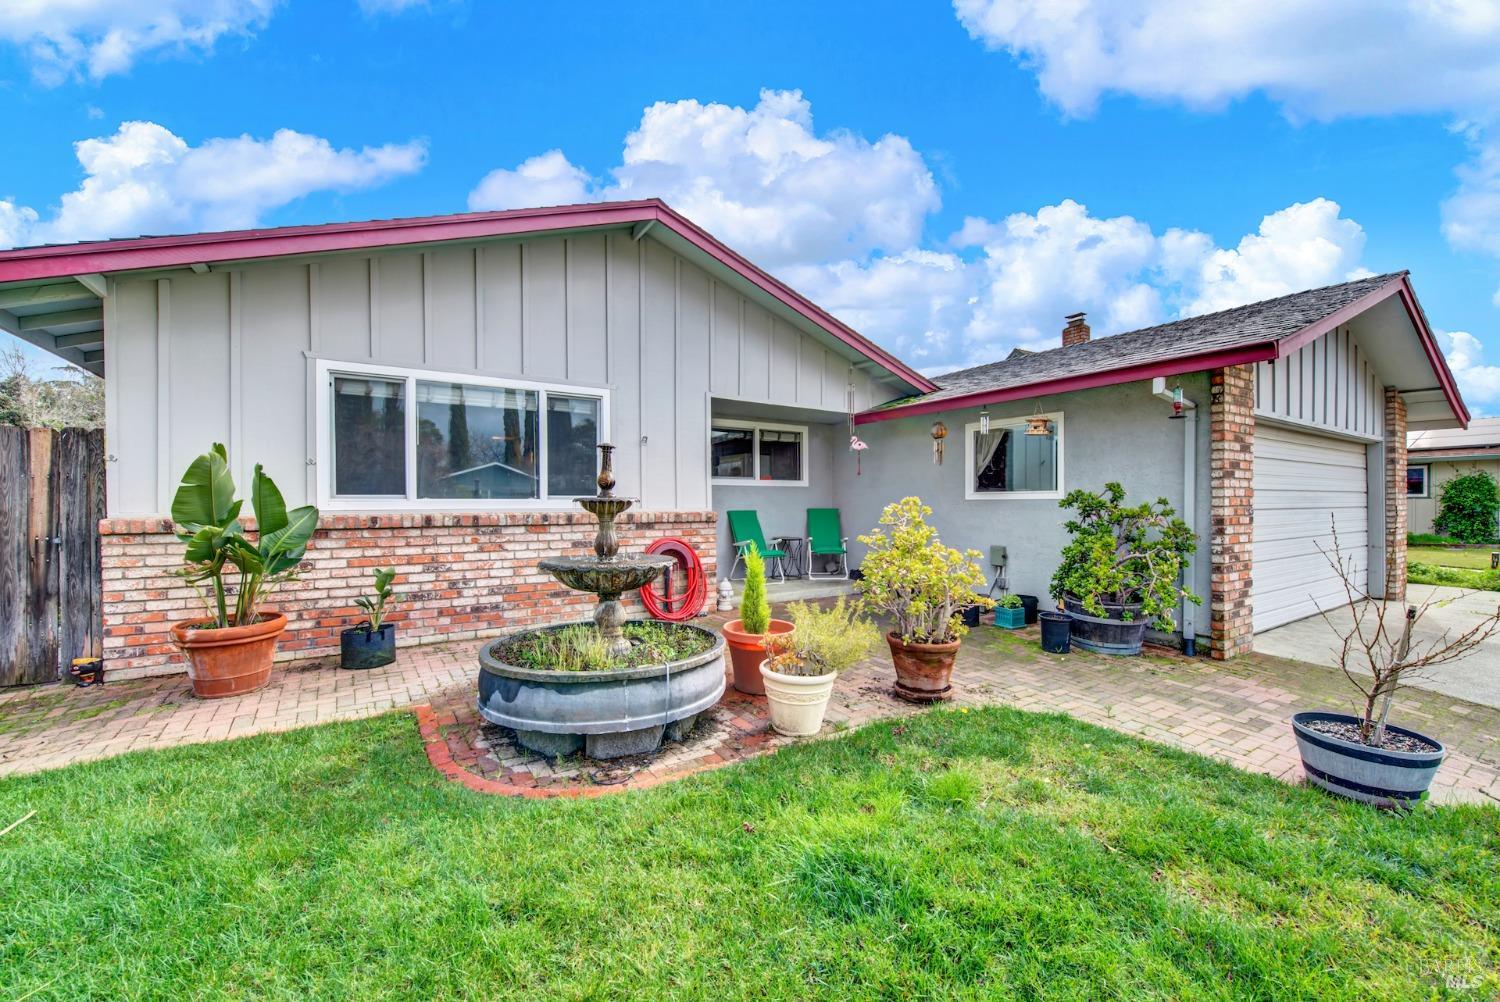 Photo of 148 Stanton Ave in Vacaville, CA